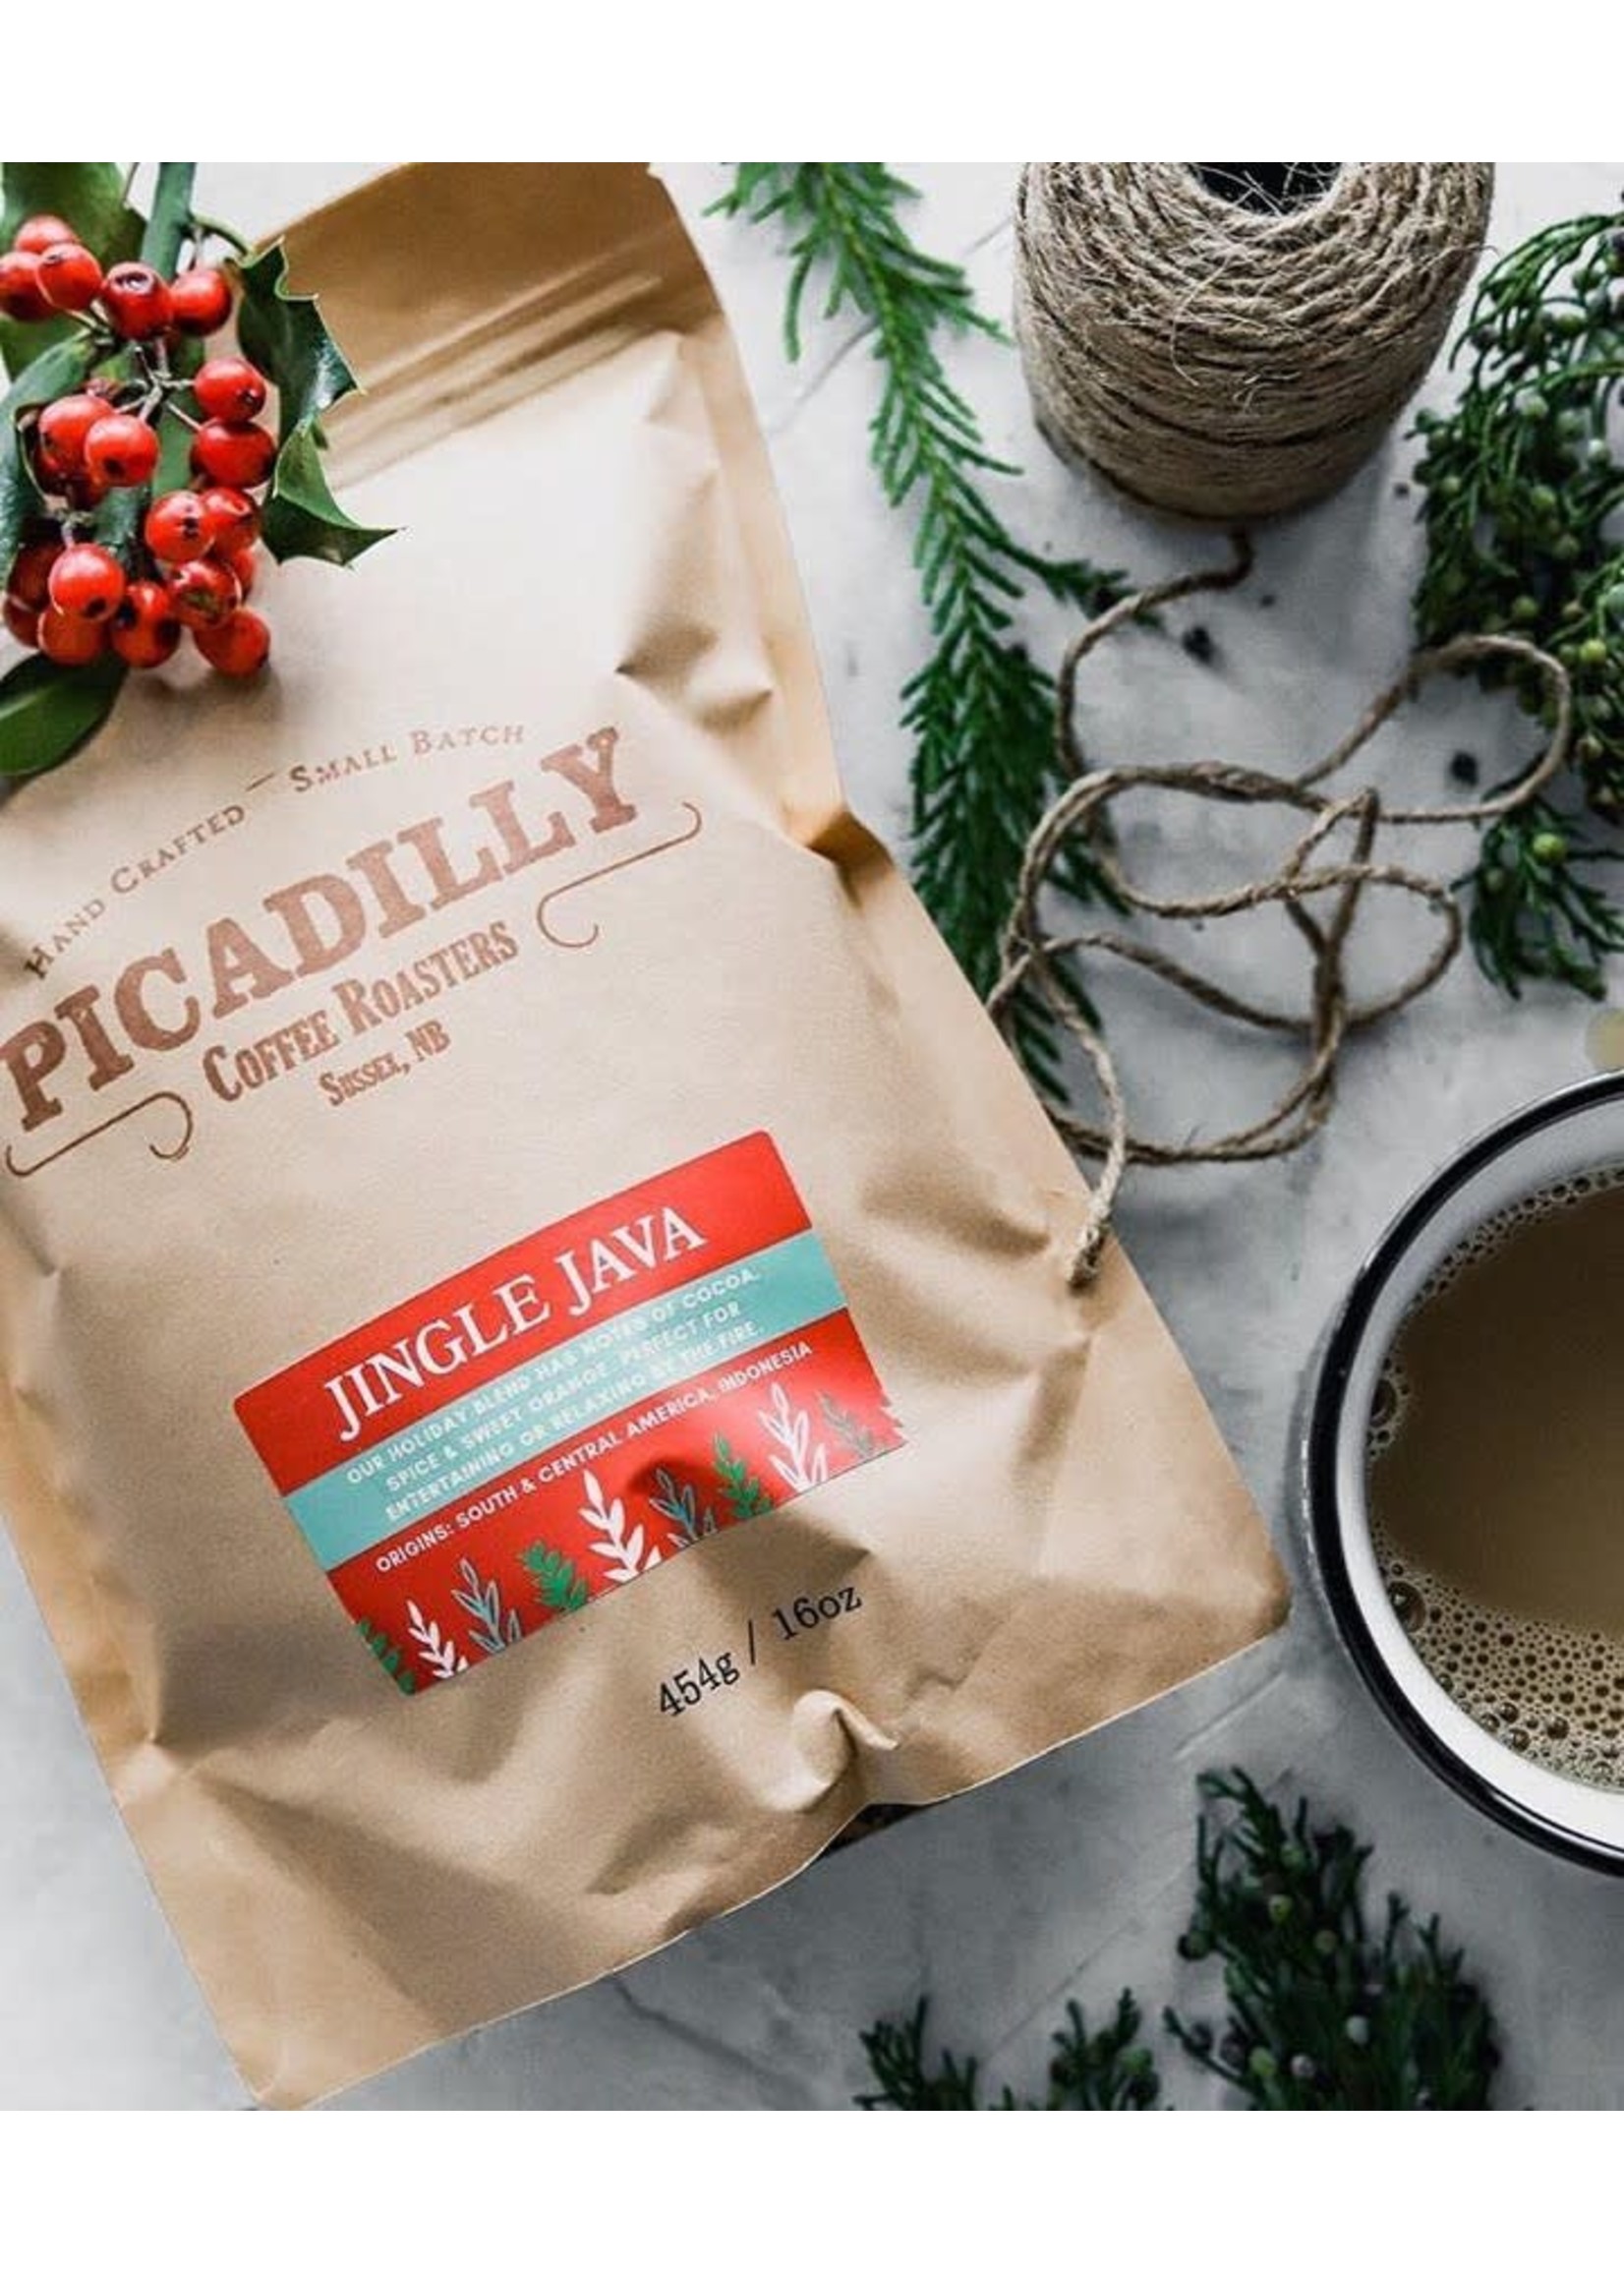 Picadilly Picadilly - Coffee Beans, Jingle Java (227g)